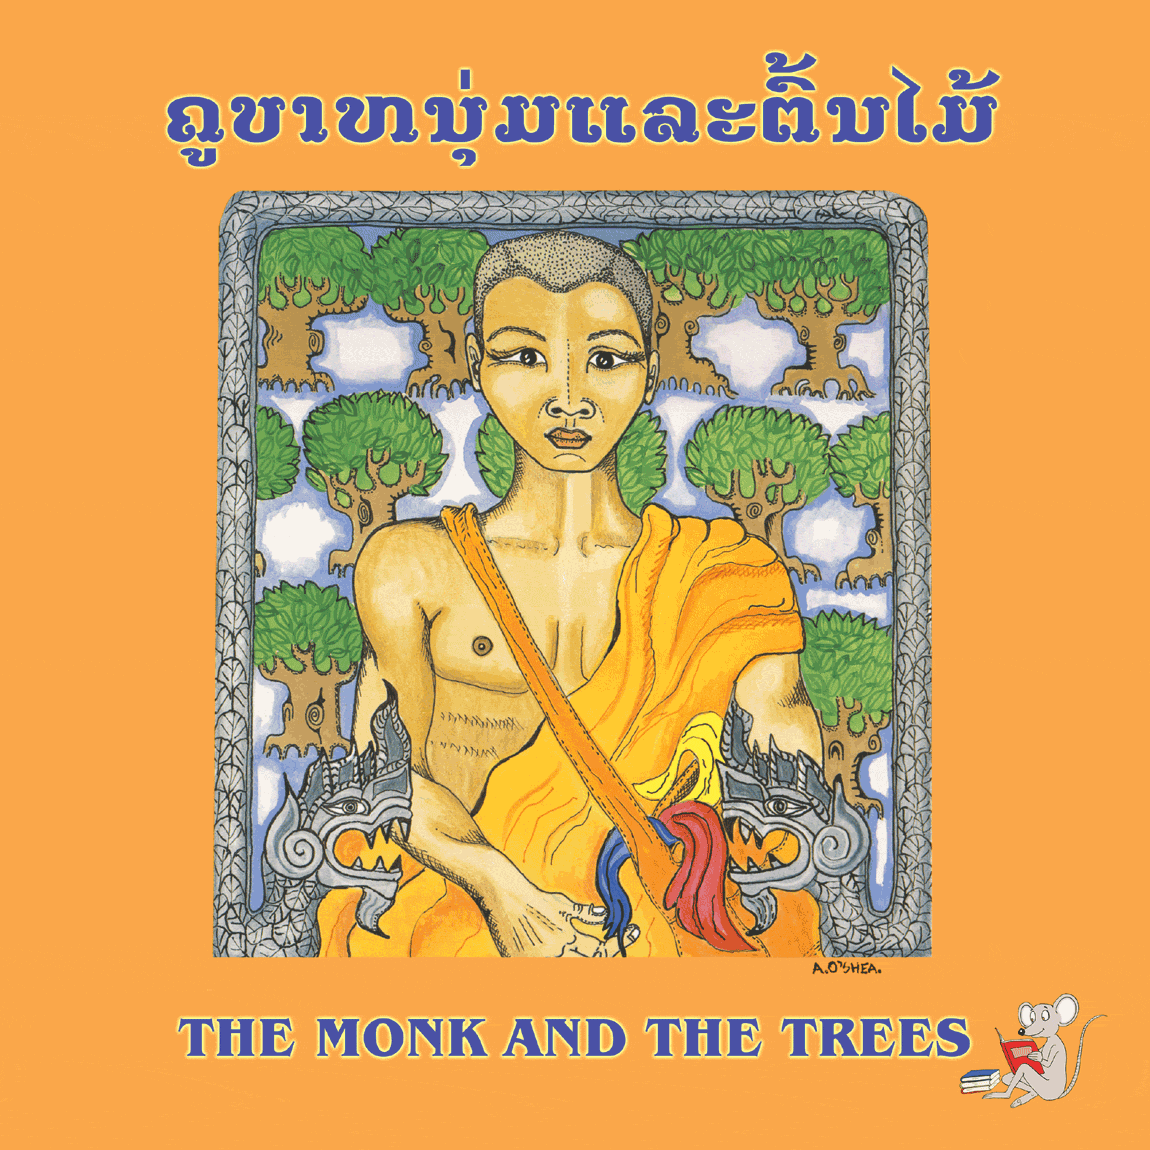 The Monk and the Trees large book cover, published in Lao and English